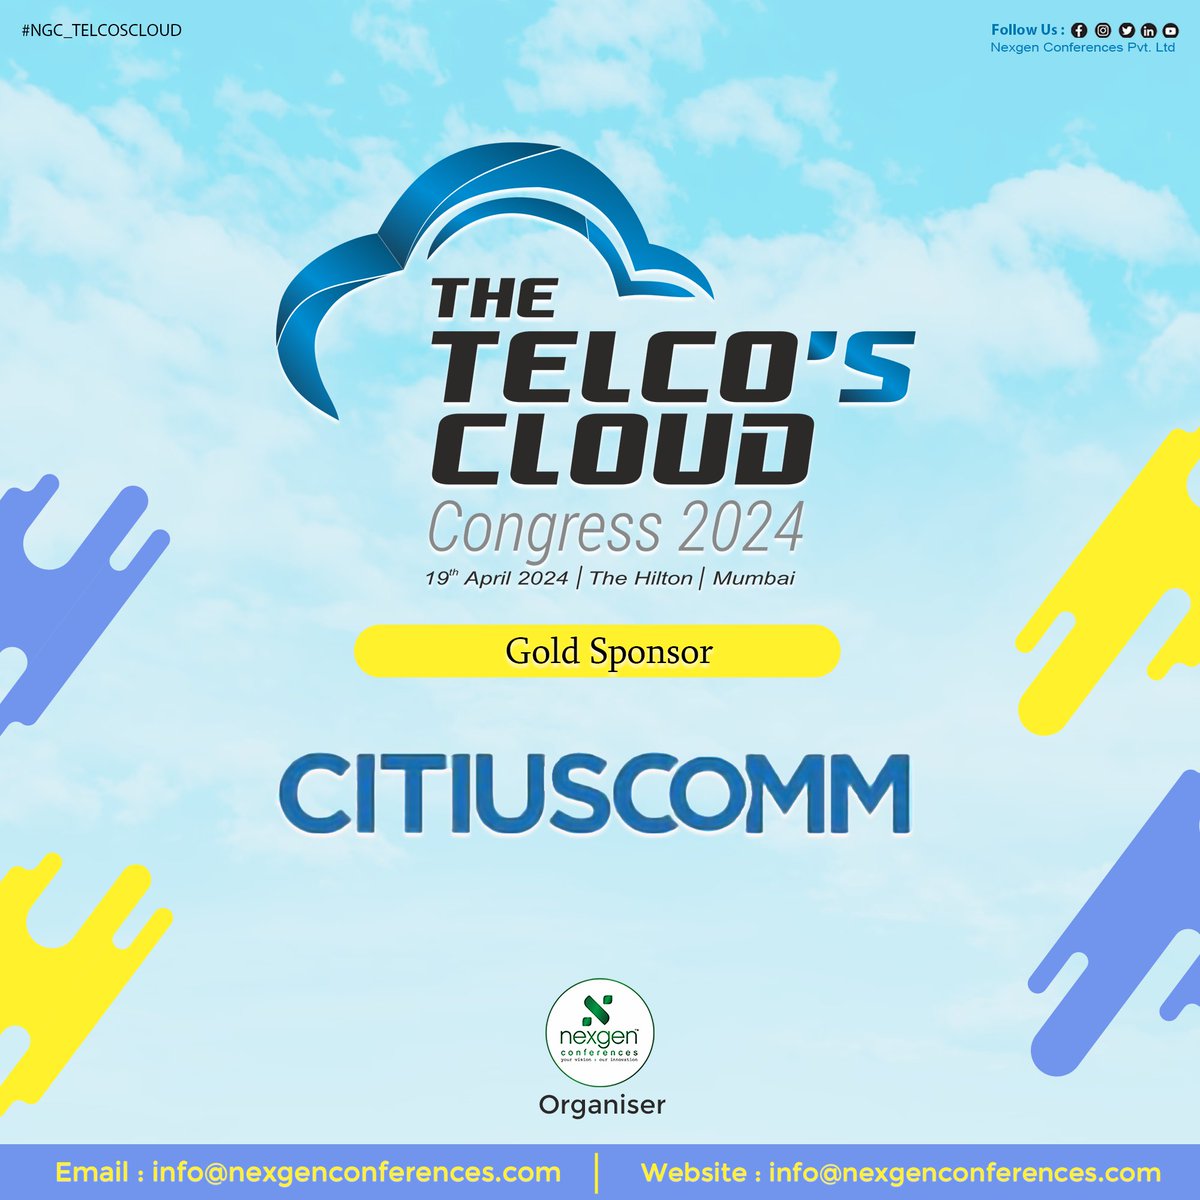 We are thrilled to announce that Citius Communications Pvt. Ltd. has come on board as a Gold Sponsor for Telco's Cloud Congress 2024! 🌟
📅 19th April 2024
⏲ 12:00PM - 07:30PM (Followed by Cocktails & Dinner)
📍 The Hilton, Mumbai
#NGC_TELCOSCLOUD #CitiusCommunications